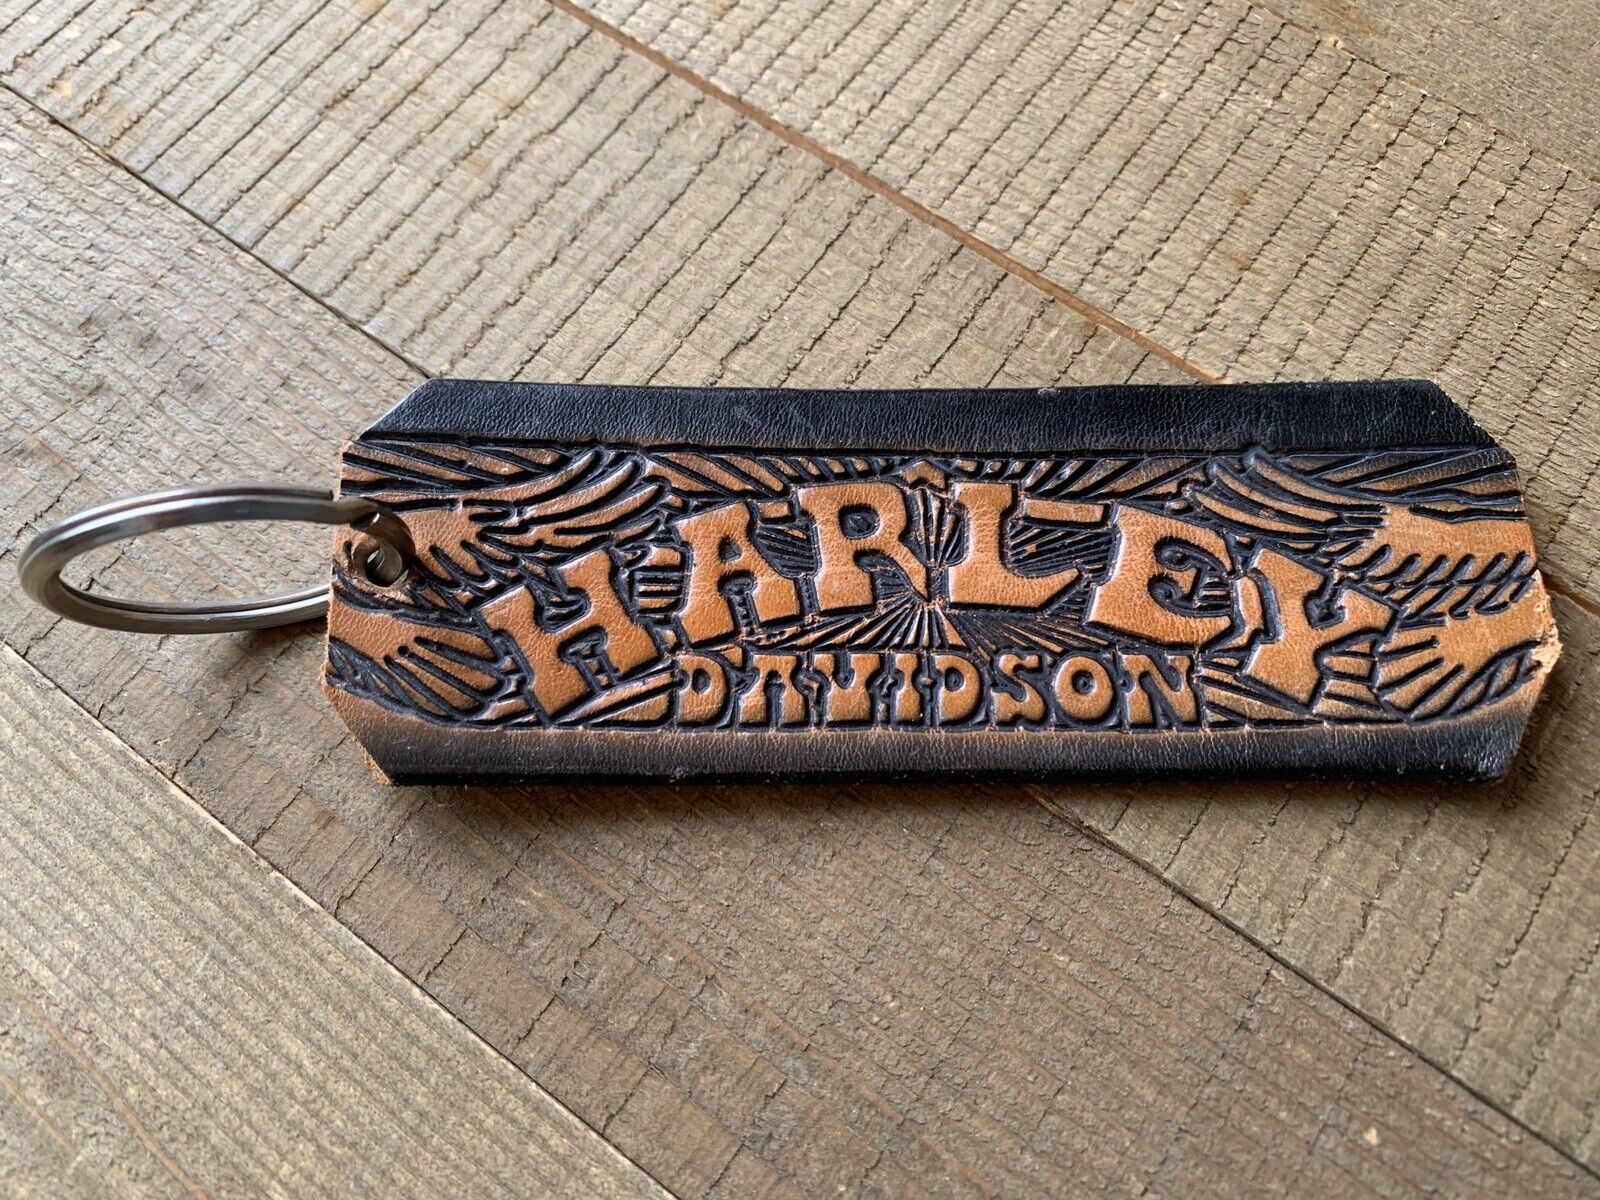 Unique Vintage Brown Tooled Leather Harley Davidson Key Chain  Cool